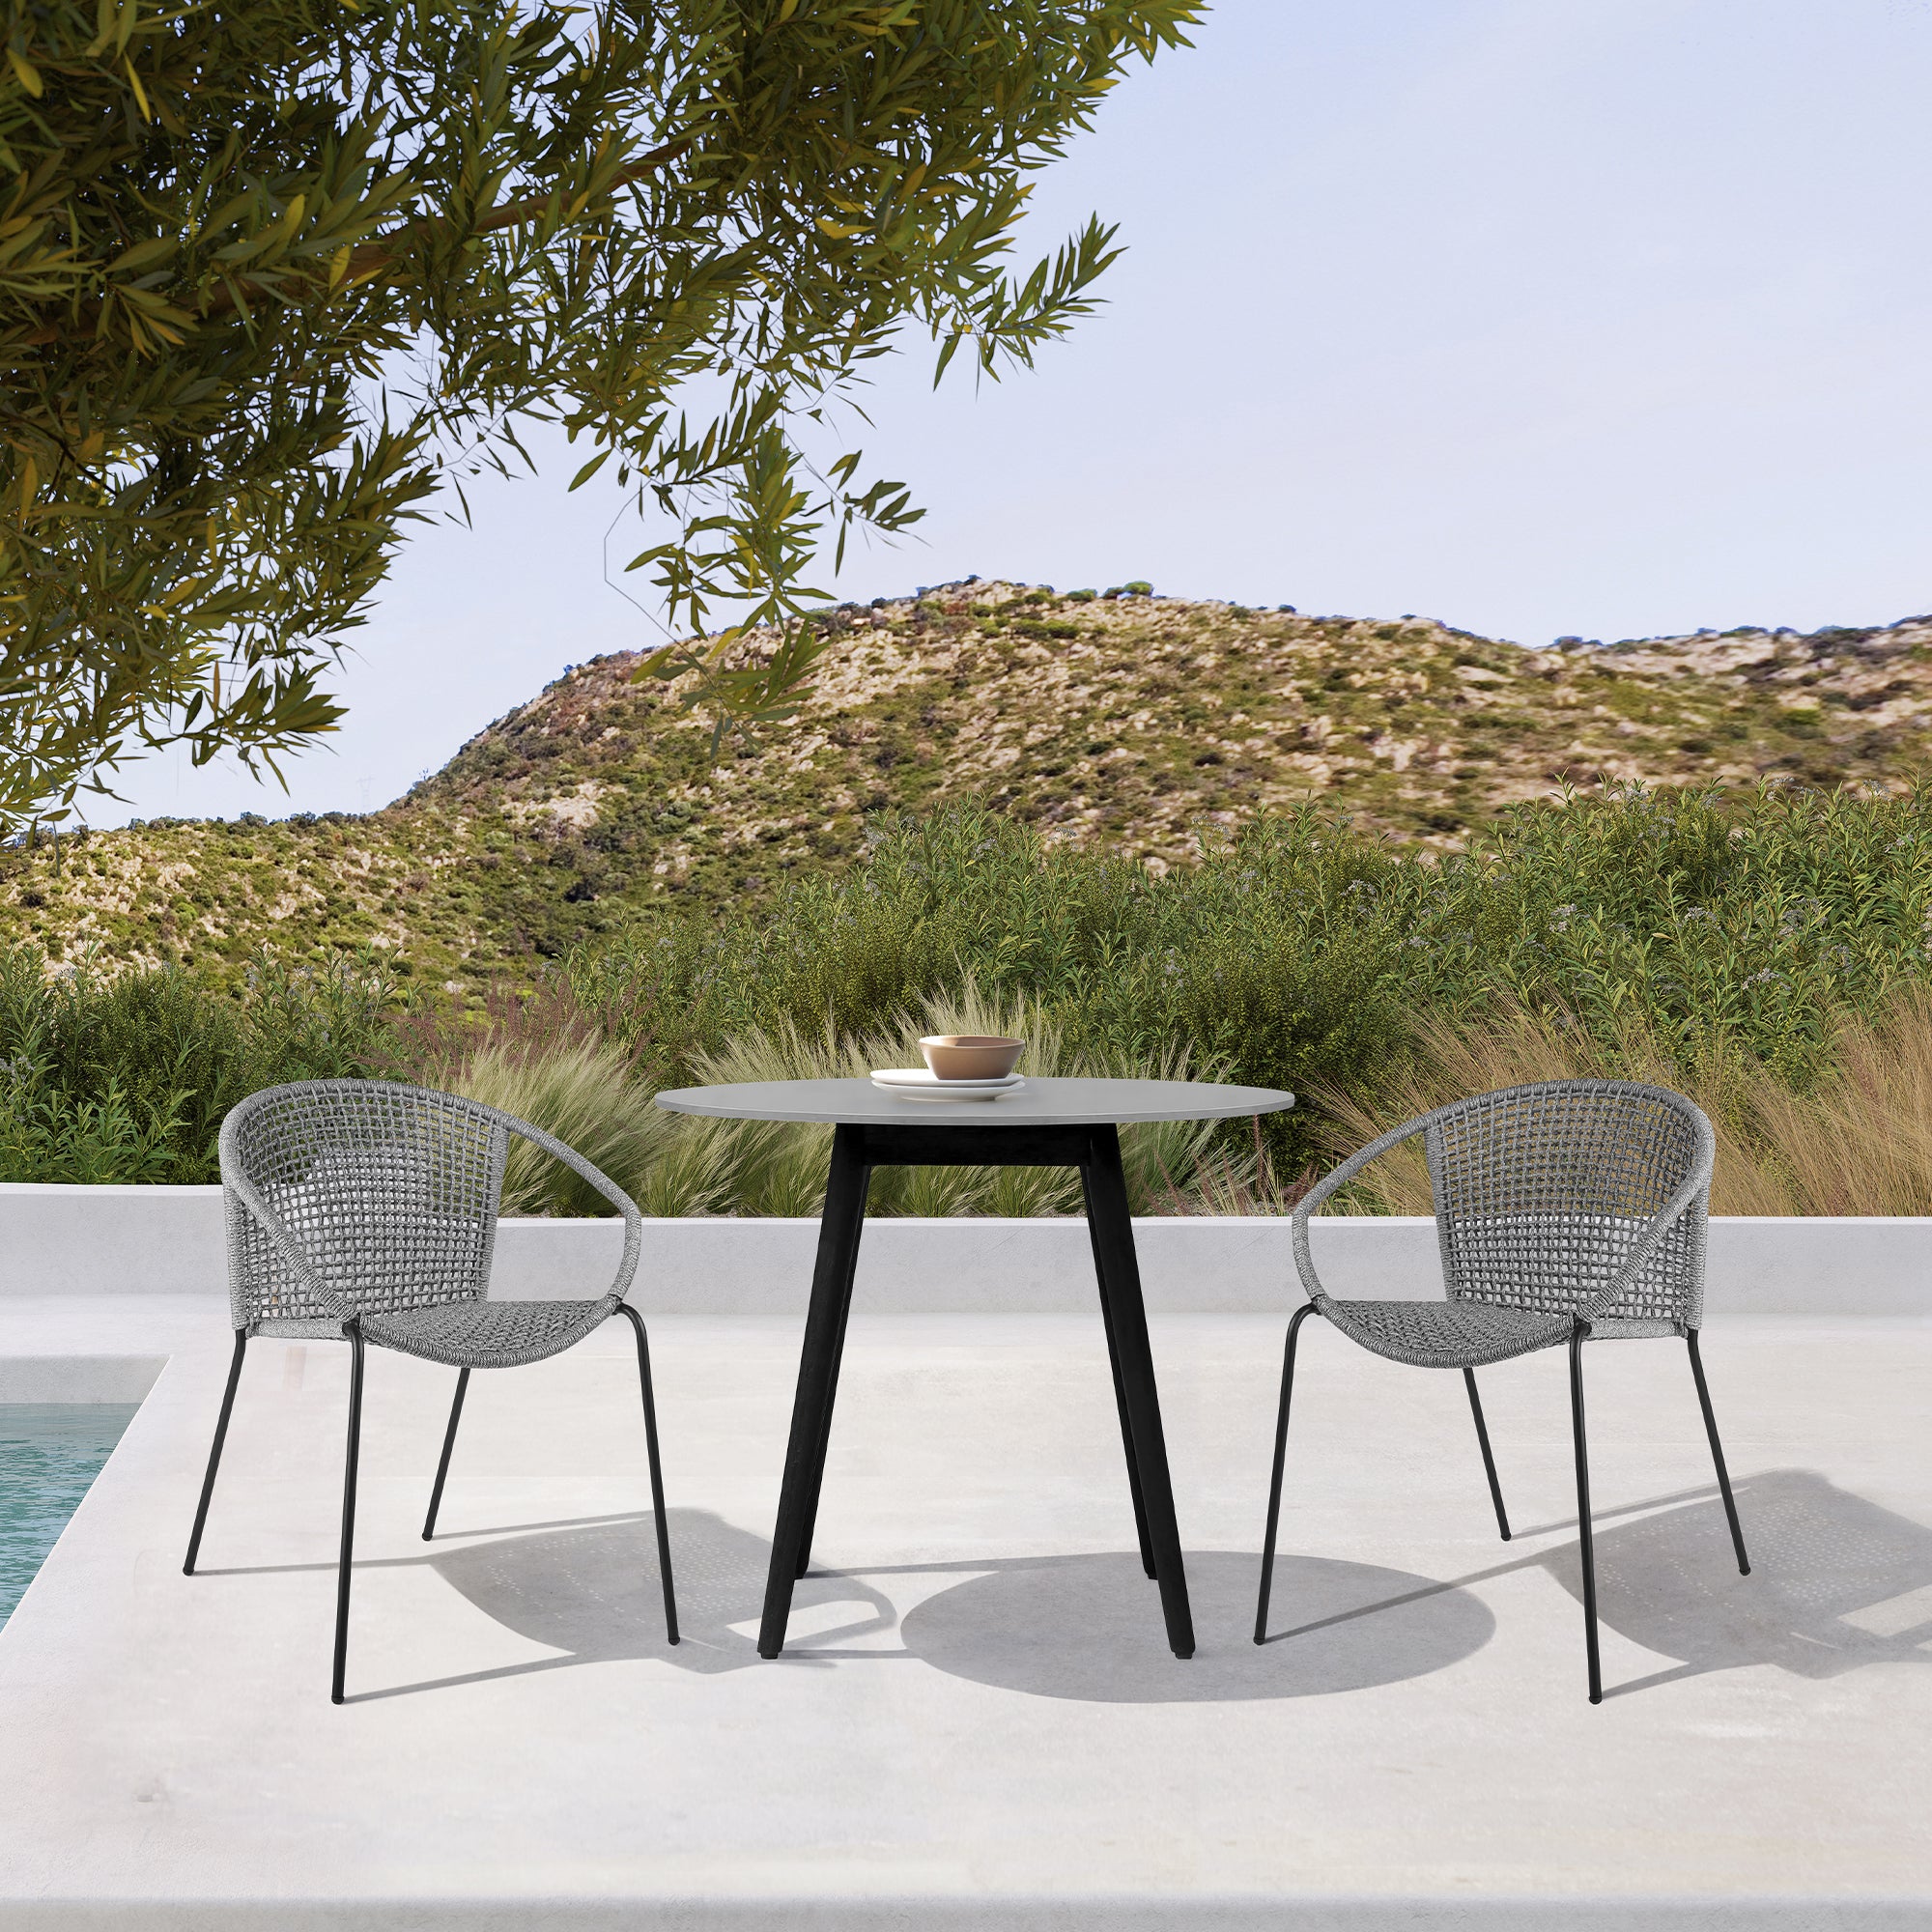 Armen Living - Sydney and Snack 3 Piece Outdoor Patio 36" Dining Set in Black Eucalyptus Wood and Grey Rope - 840254333765